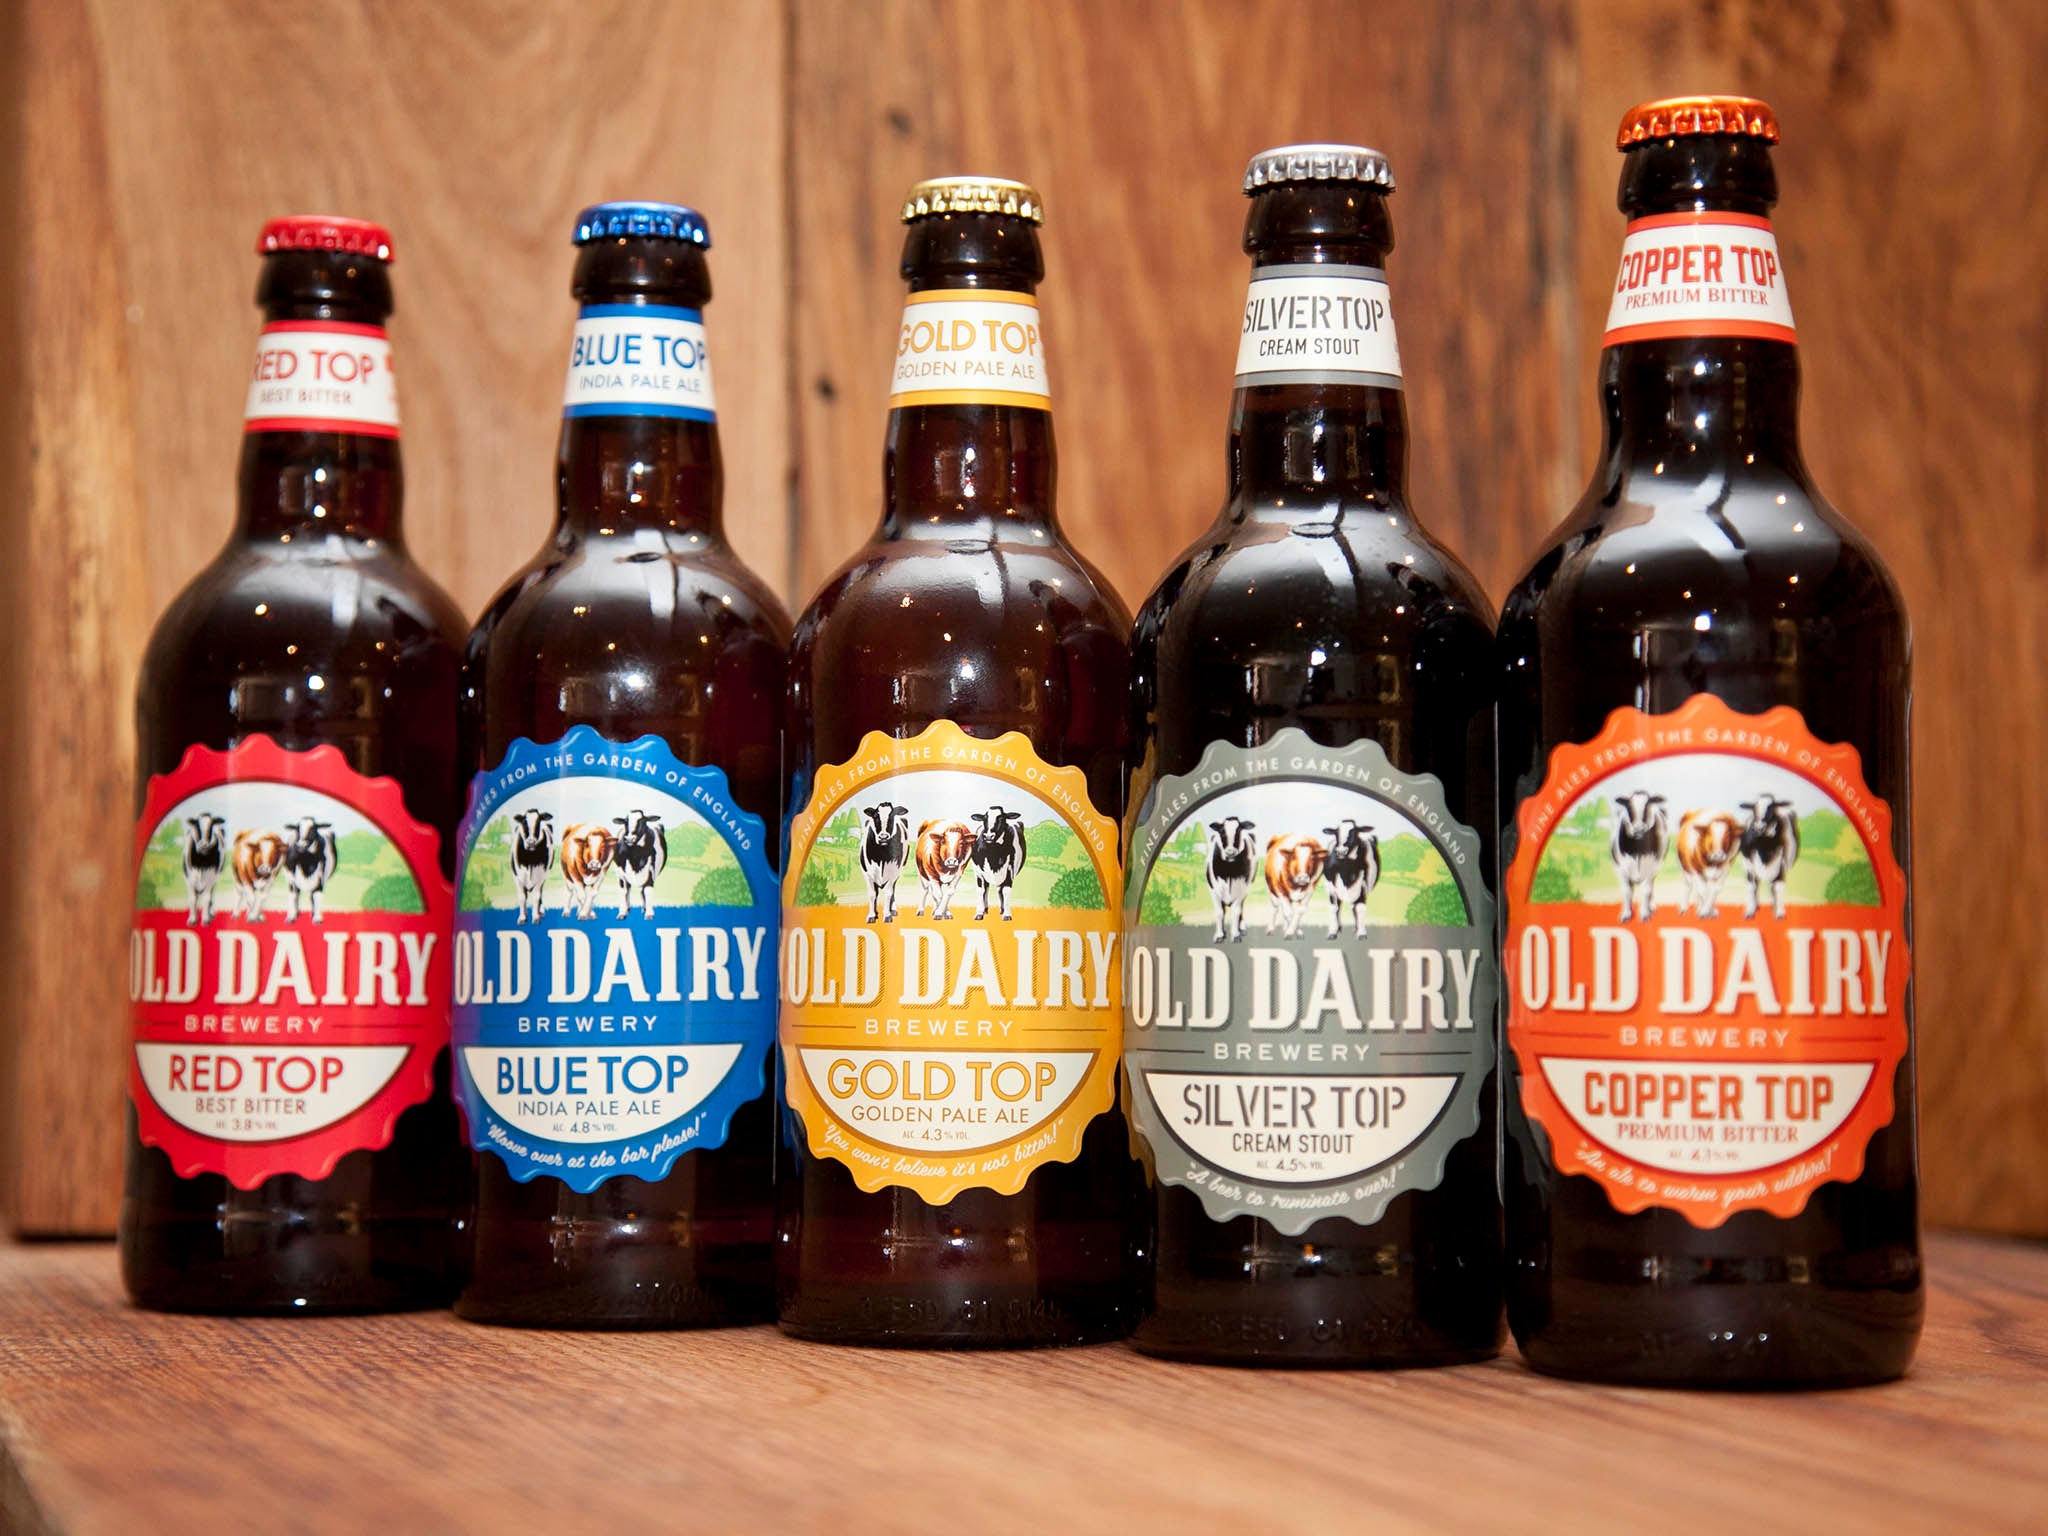 Real ale enthusiasts rave about the Old Dairy Brewery’s finely crafted recipes and local hops